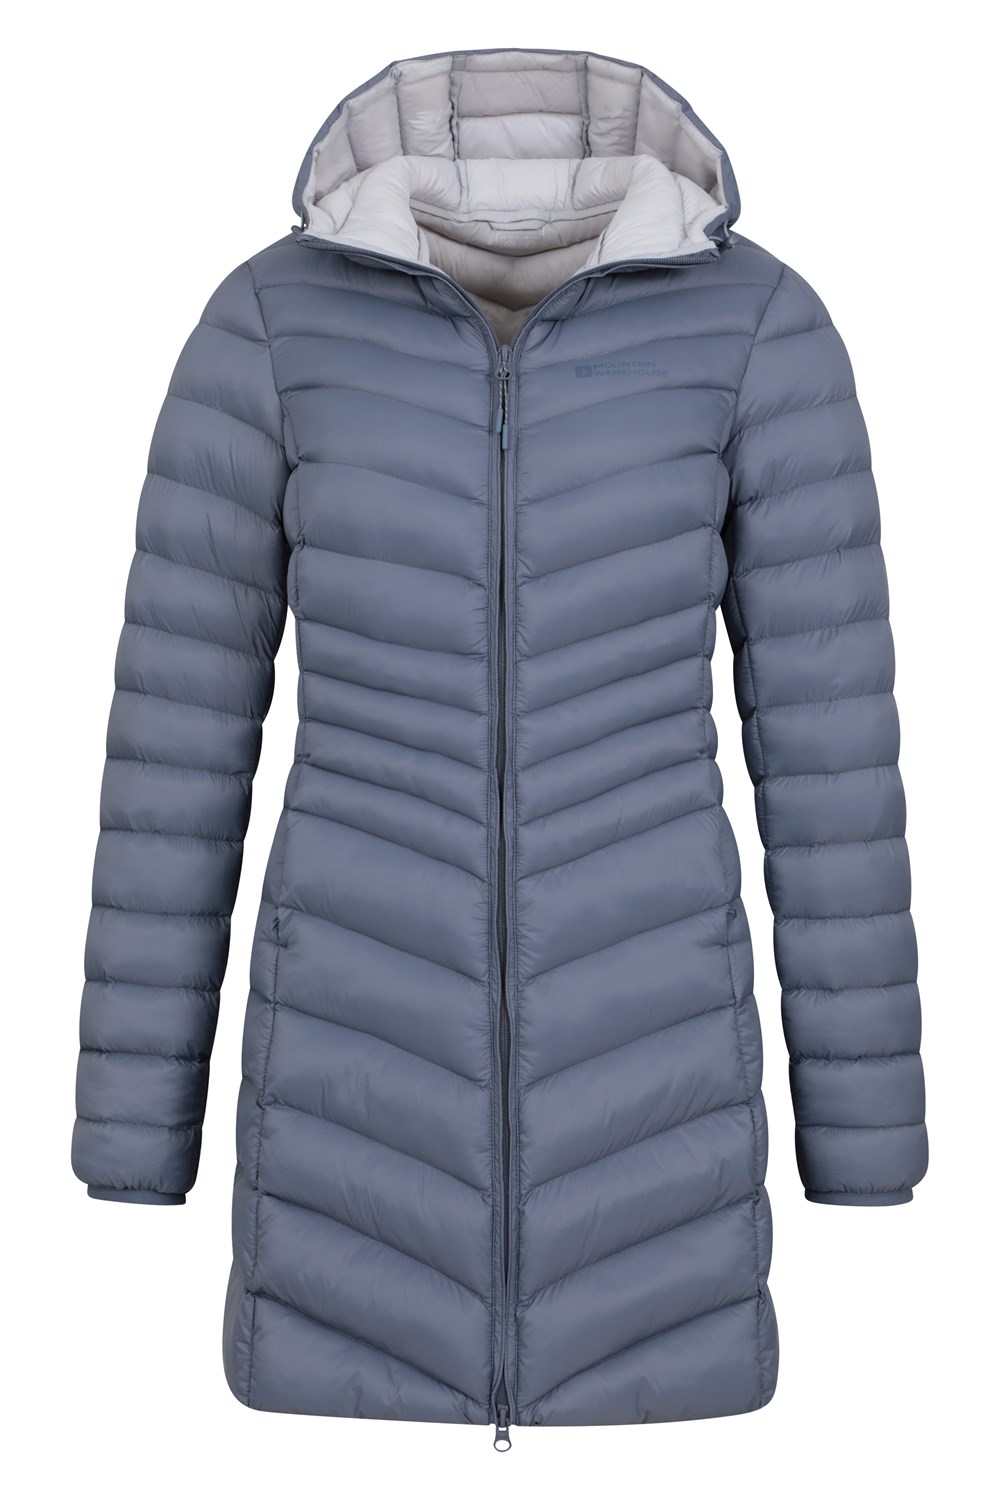 Mountain Warehouse Womens Padded Long Jacket Water Resistant Winter ...